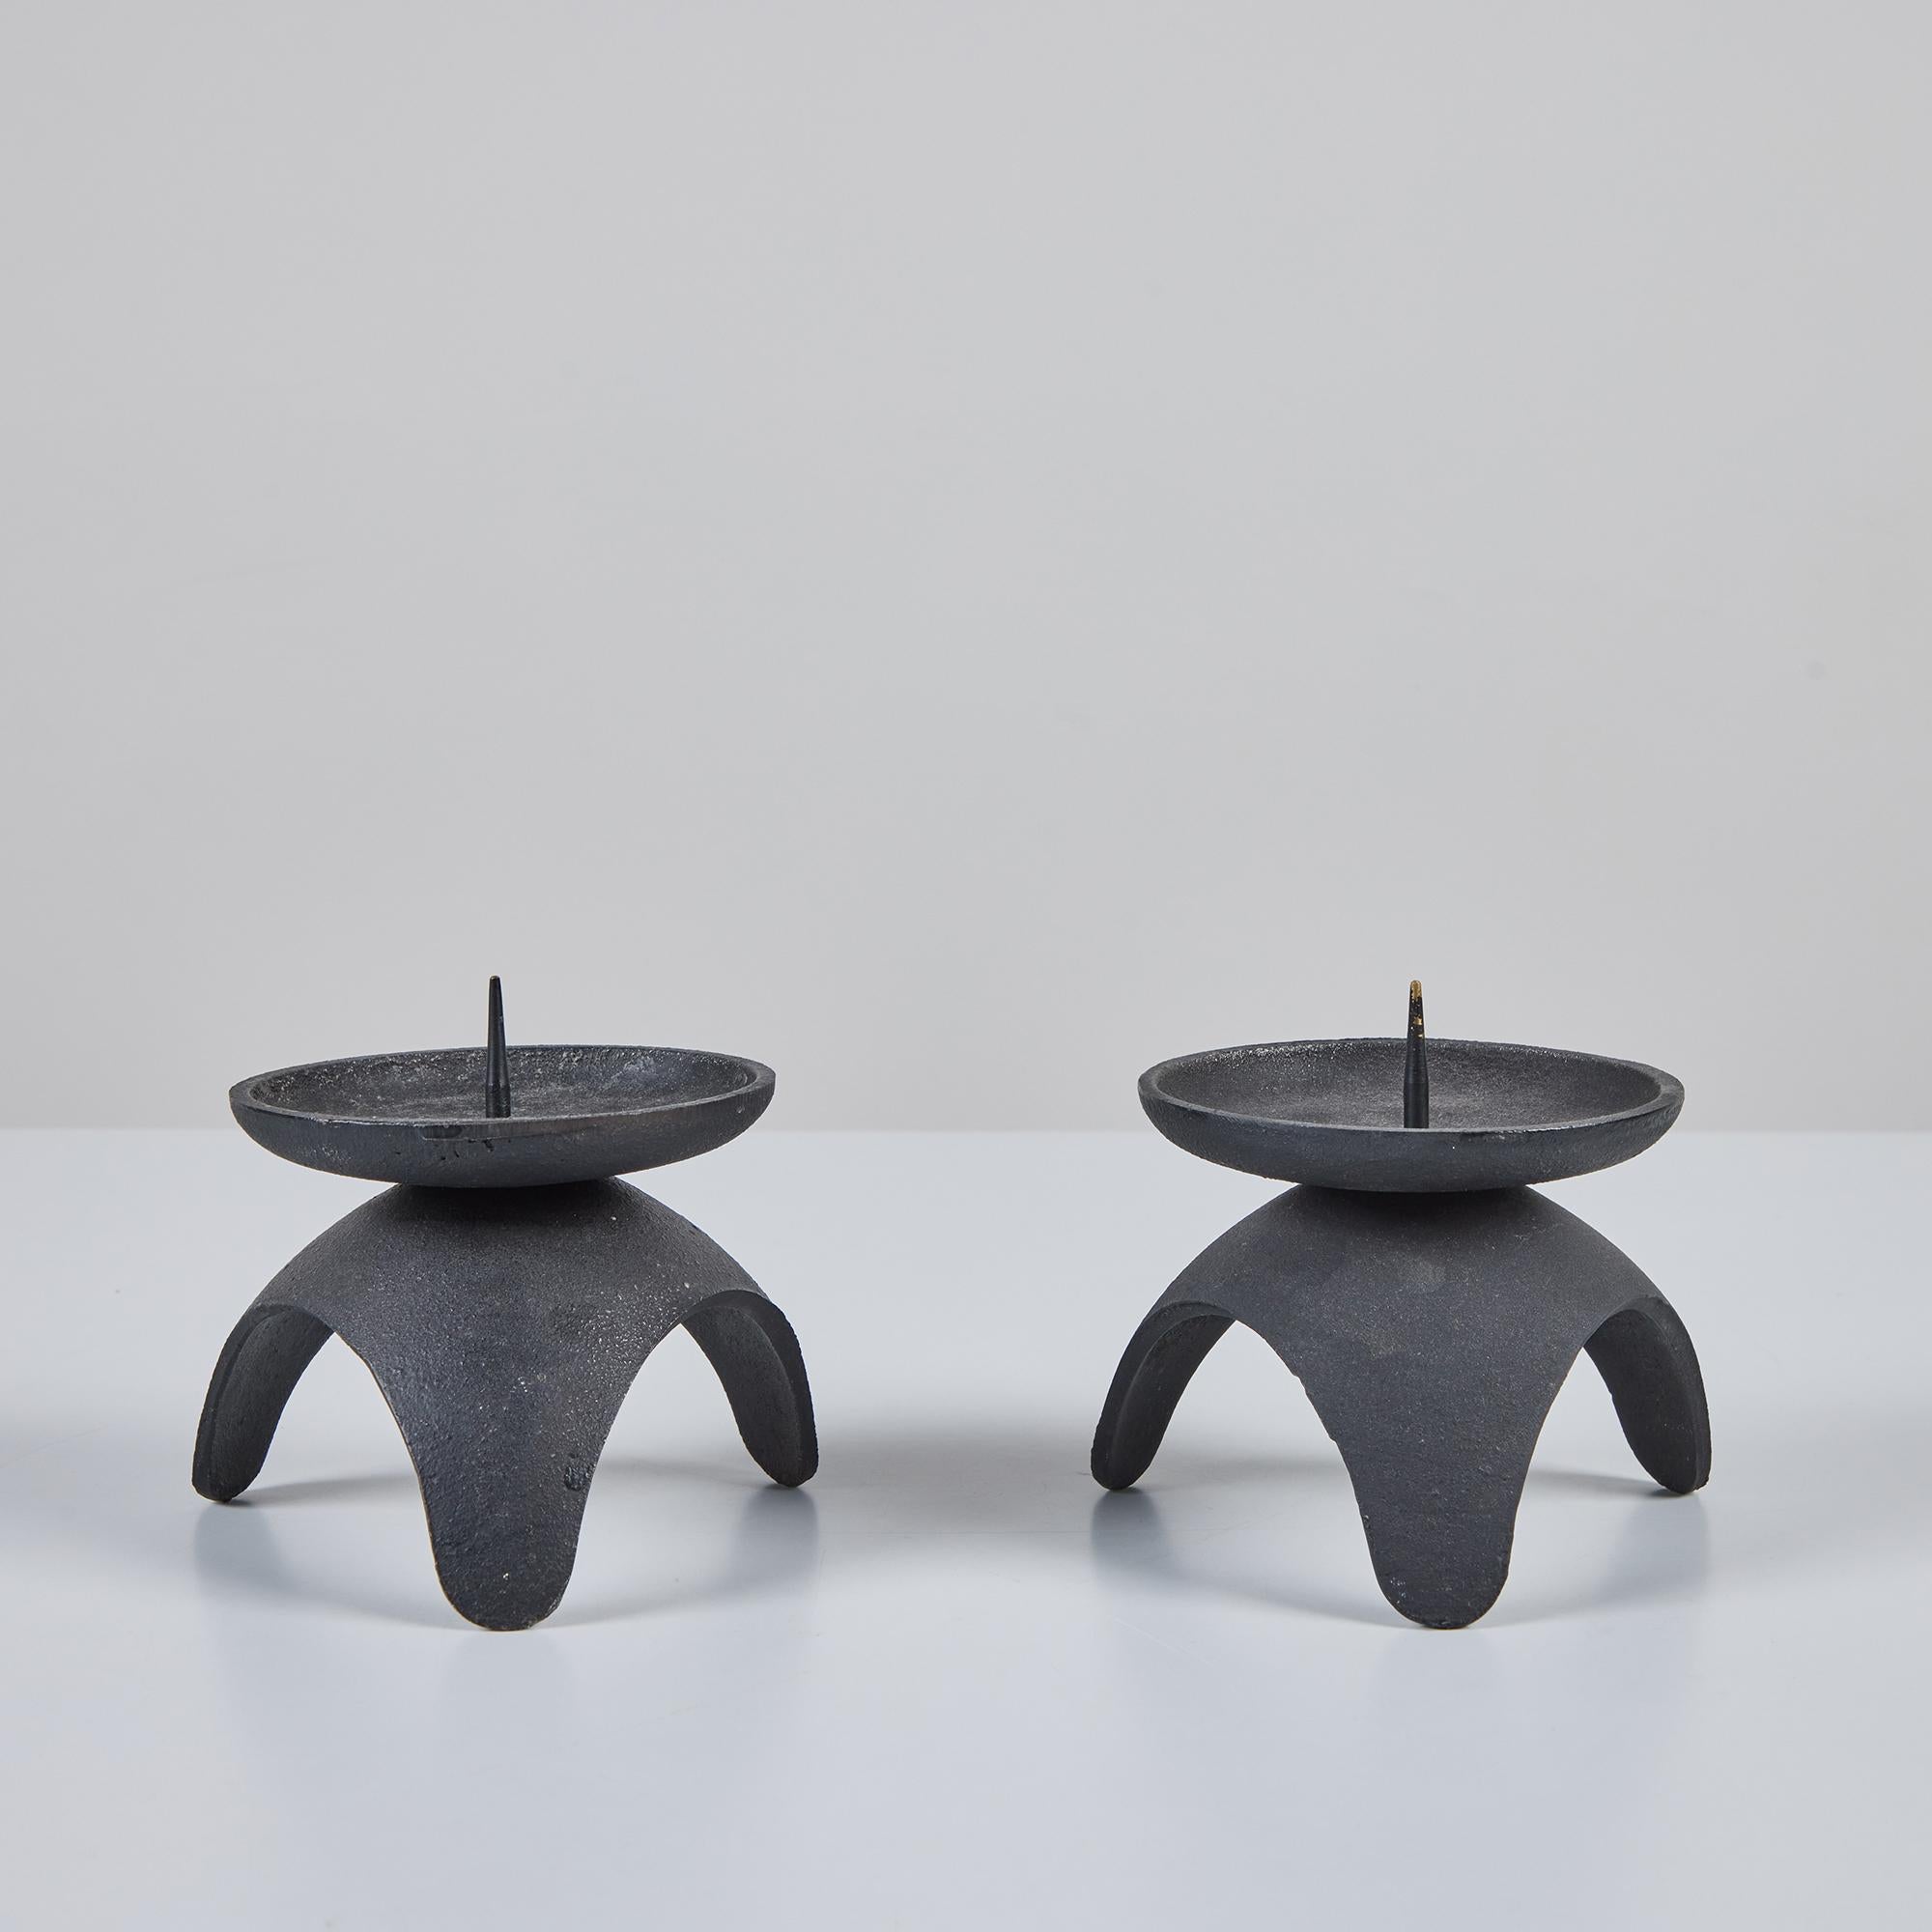 Pair of pillar tripod cast iron candle holders. This example was produced in Japan and features a round basin with curved rims and center spikes to hold the candles. 

Dimensions
Each Candle Holder - 4.25